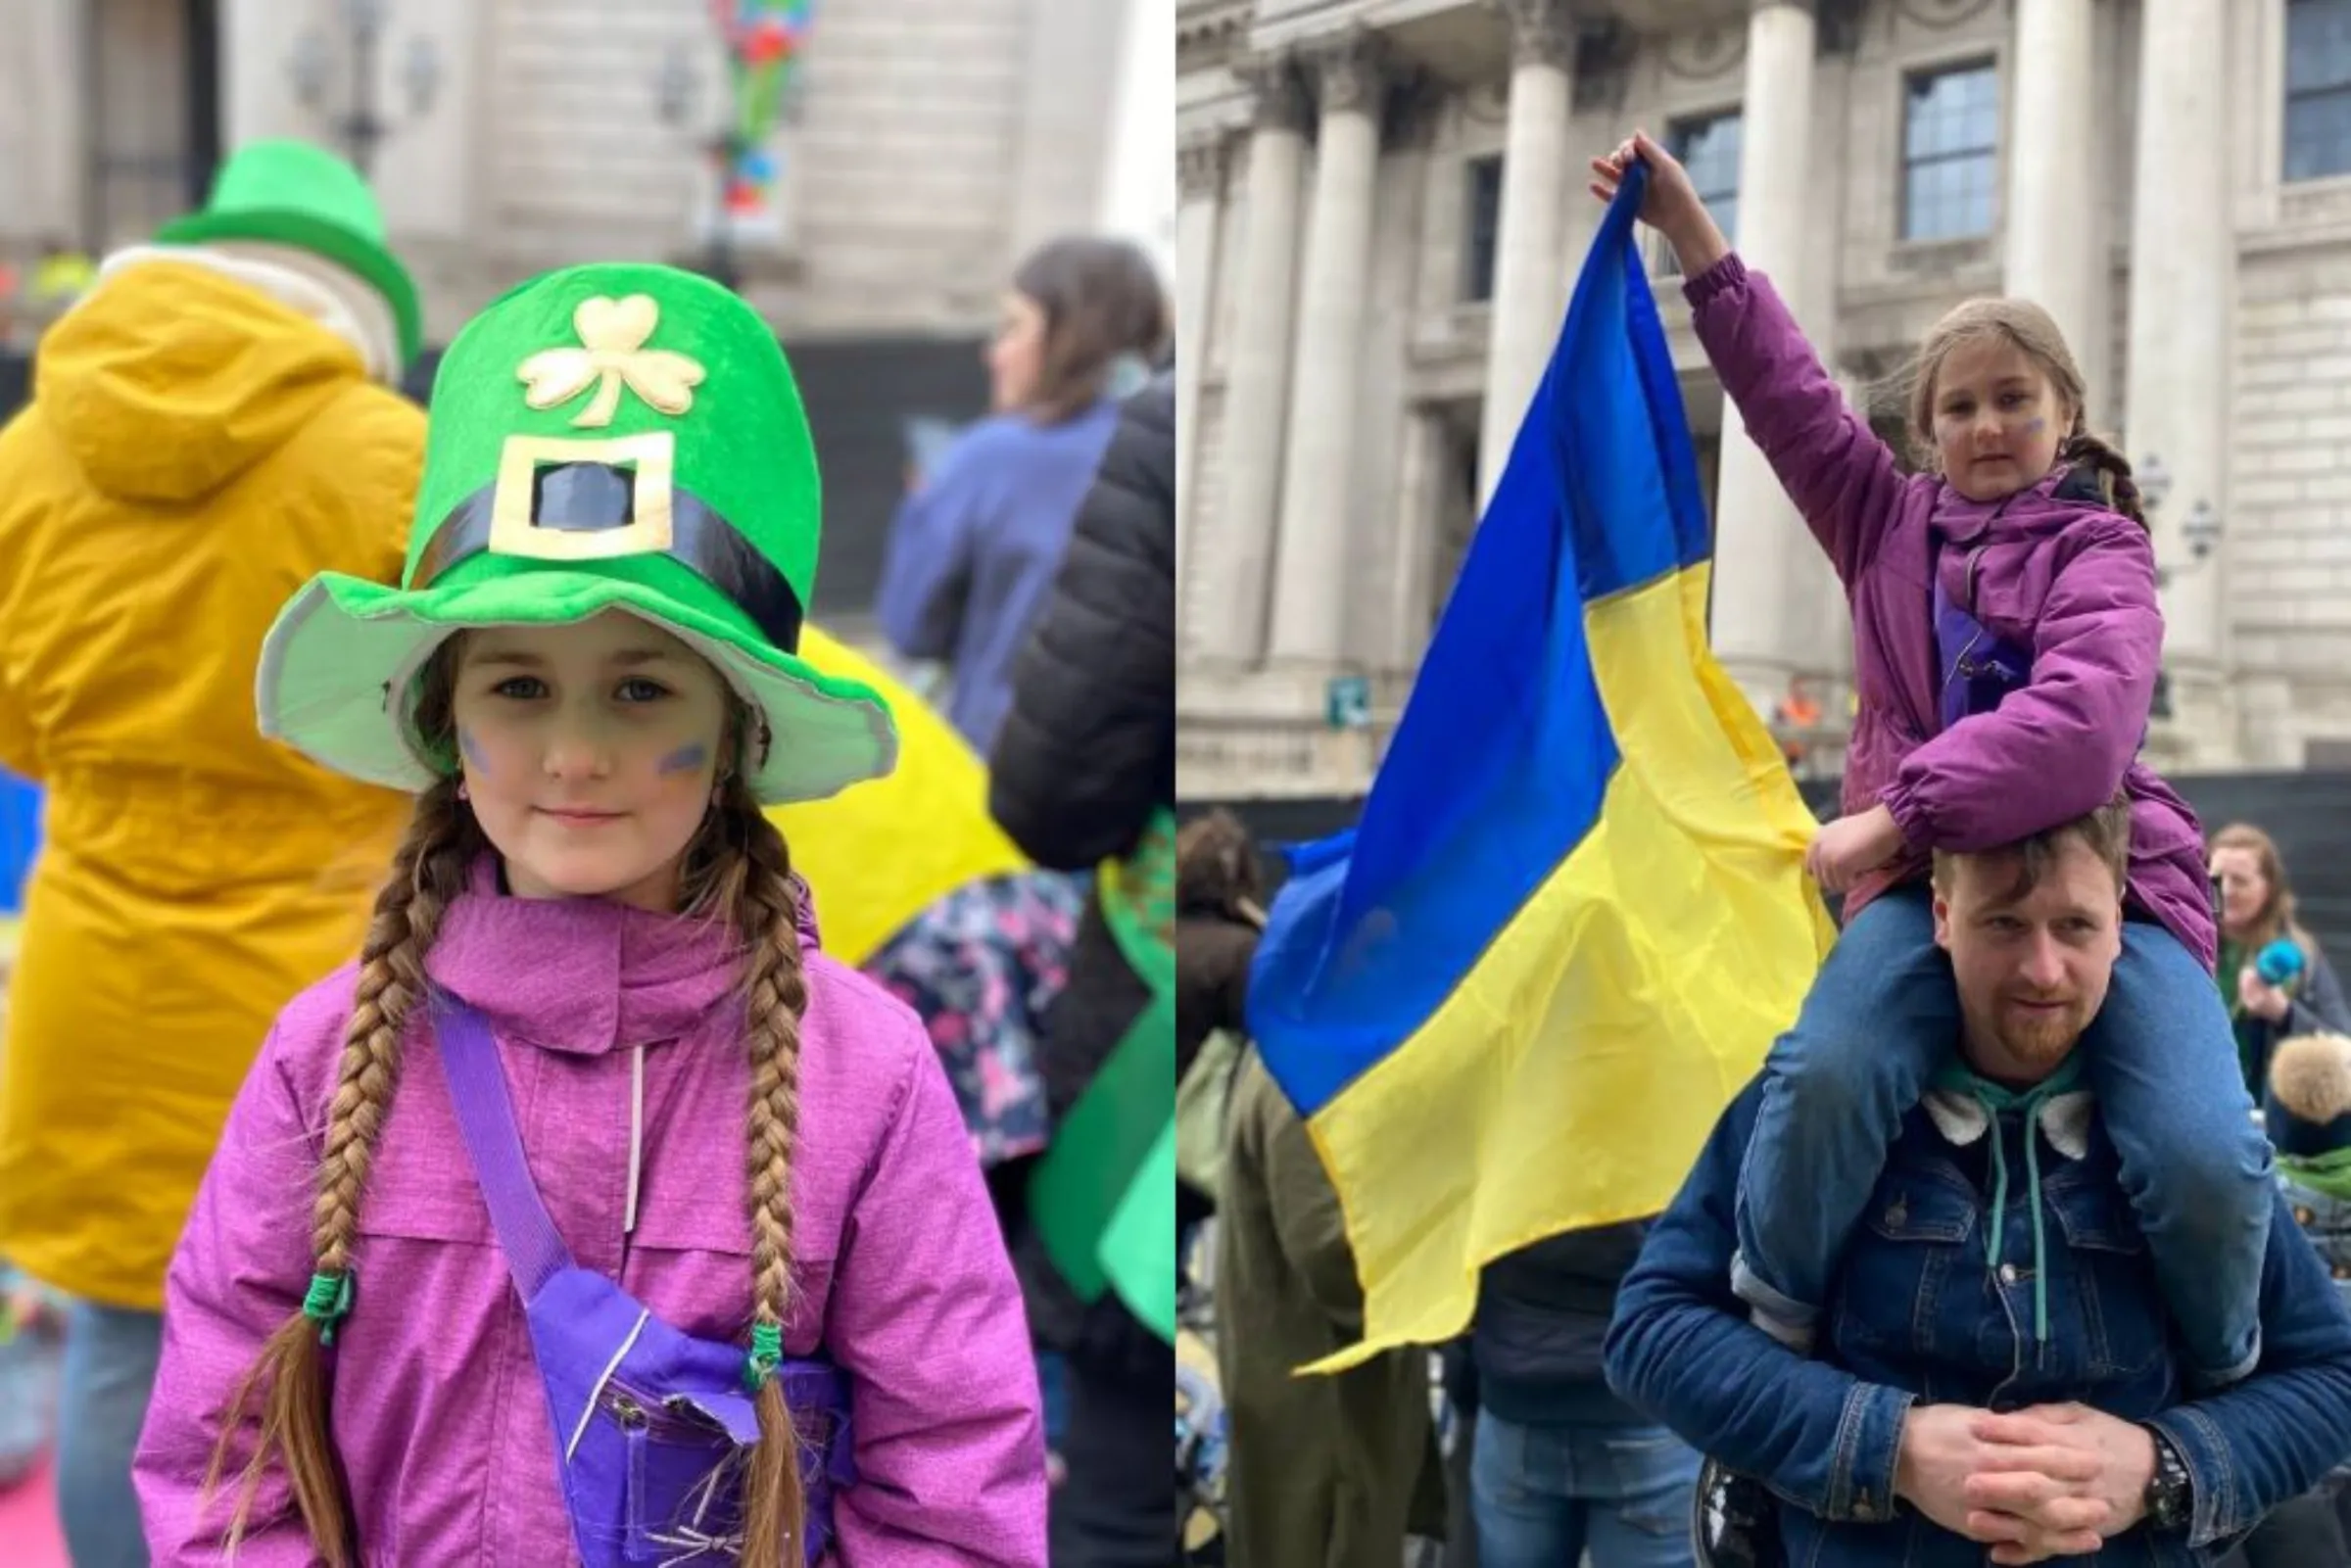 Ukrainian refugee Varvara, 8, attends the St Patrick's Day Parade with her uncle Andriy Koslovskyi in the Irish capital Dublin on March 17, 2022